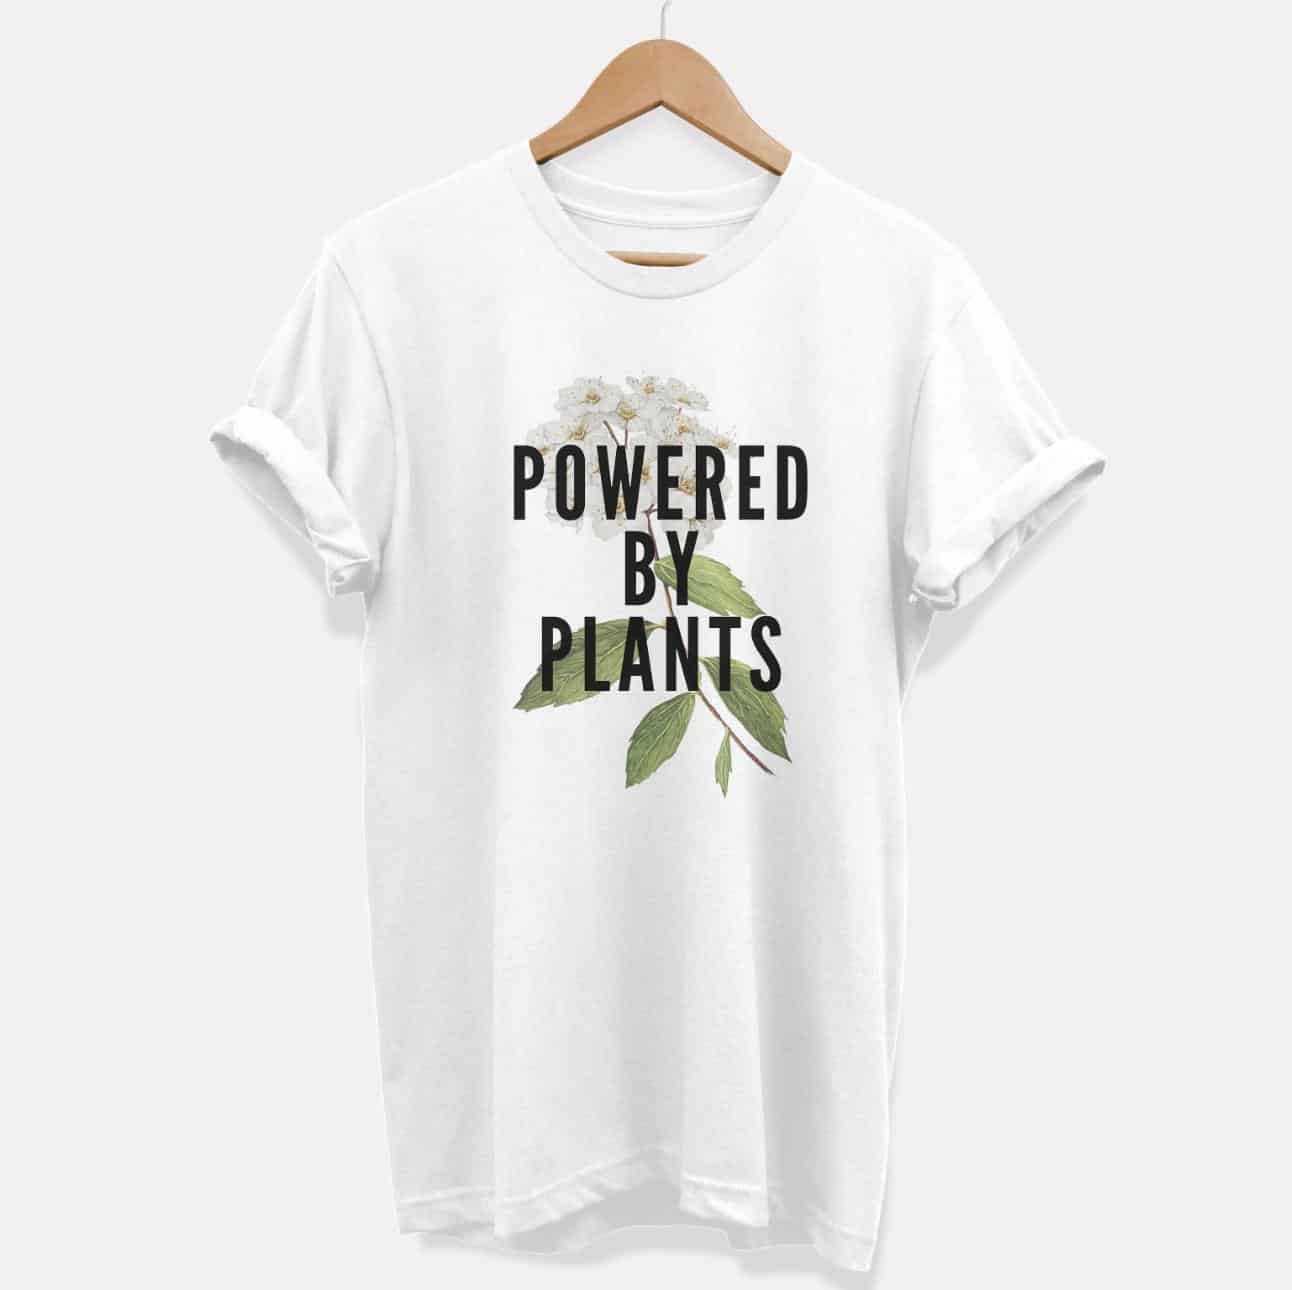 T-shirt on a hanger. T-shirt says "Powered by Plants" superimposed over a flower and stem